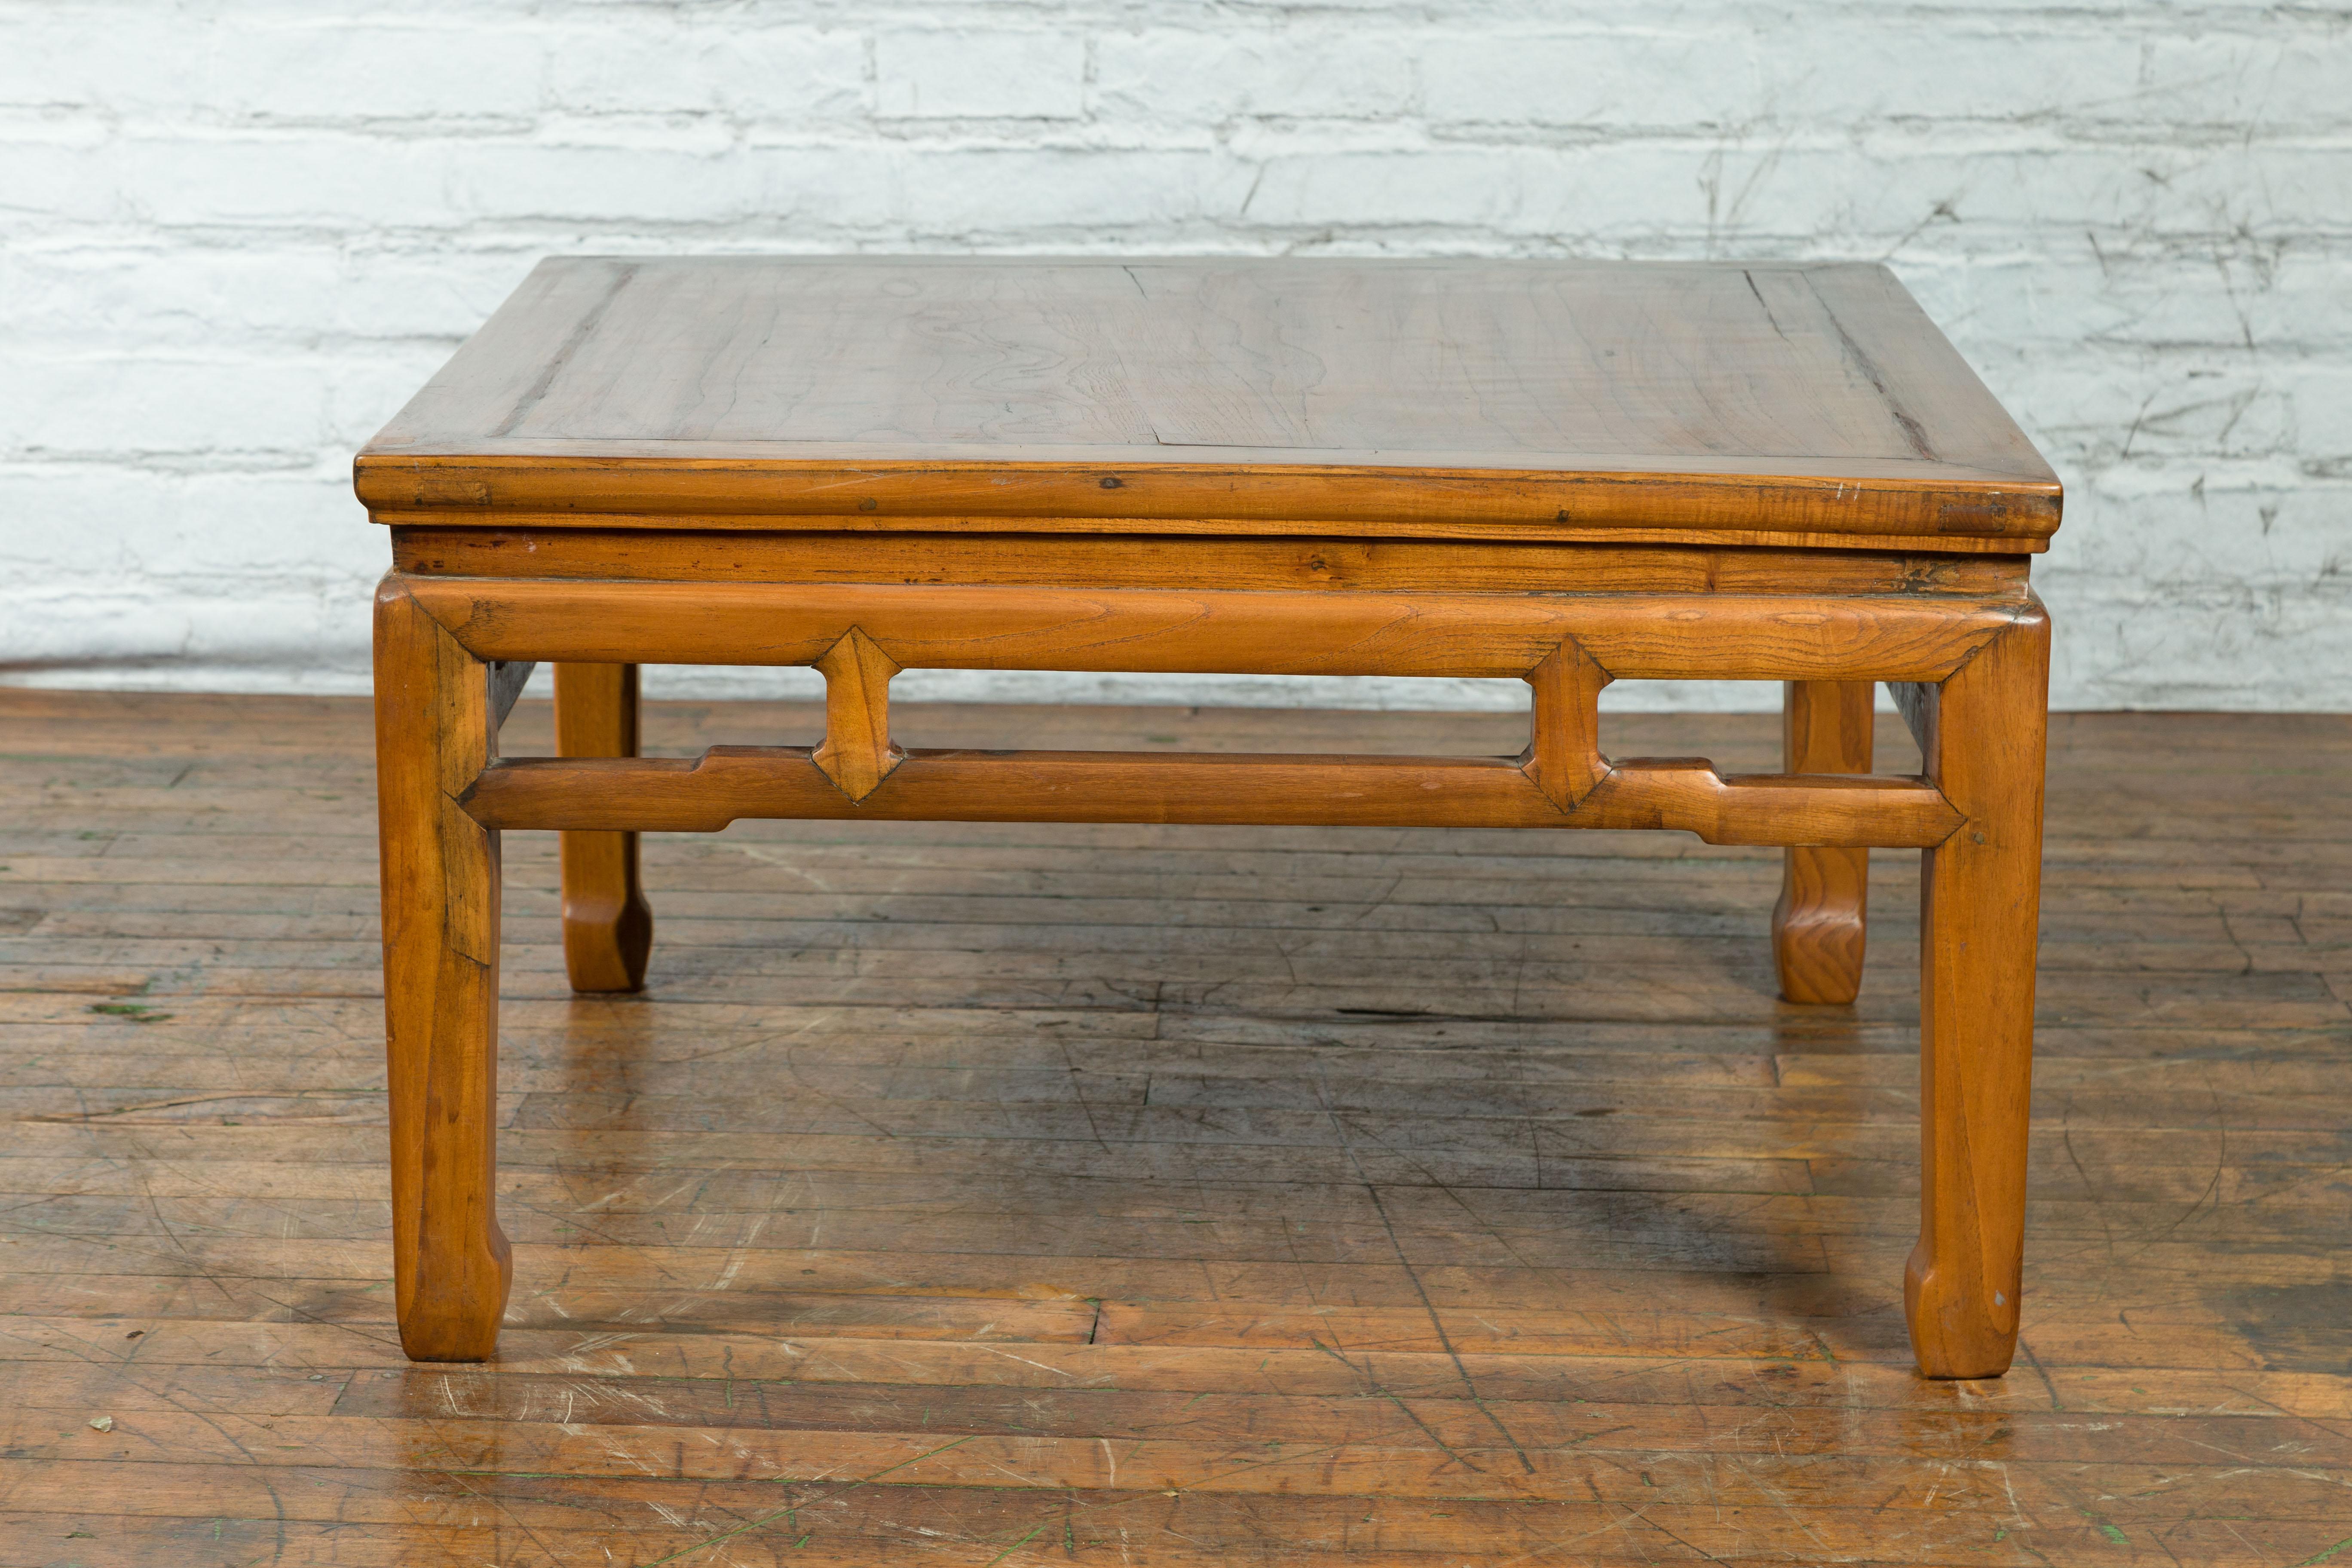 Carved Chinese Qing Dynasty Low Table with Humpback Stretcher and Horse Hoof Feet